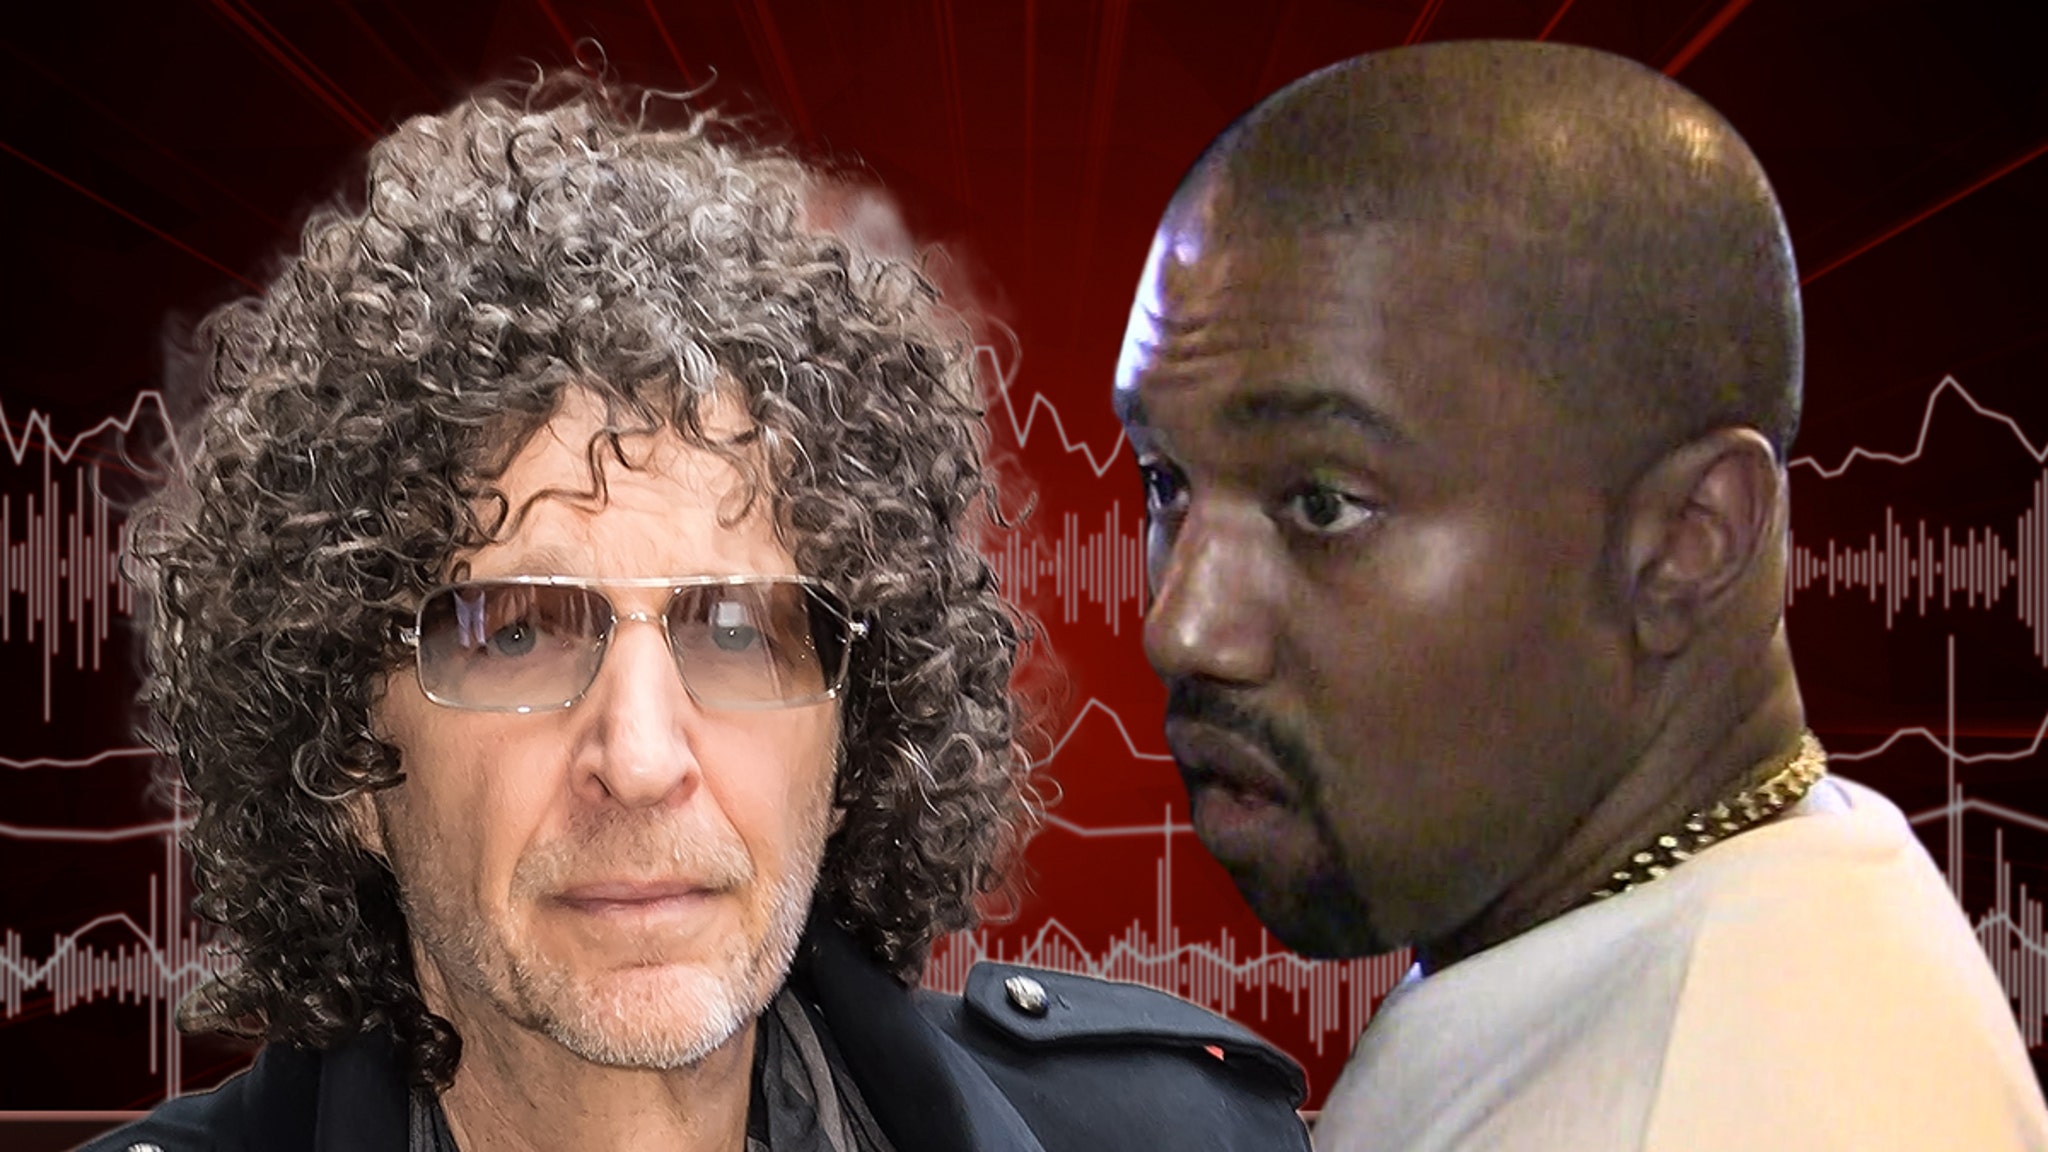 Howard Stern compares Kanye West to Hitler and calls him an "asshole"